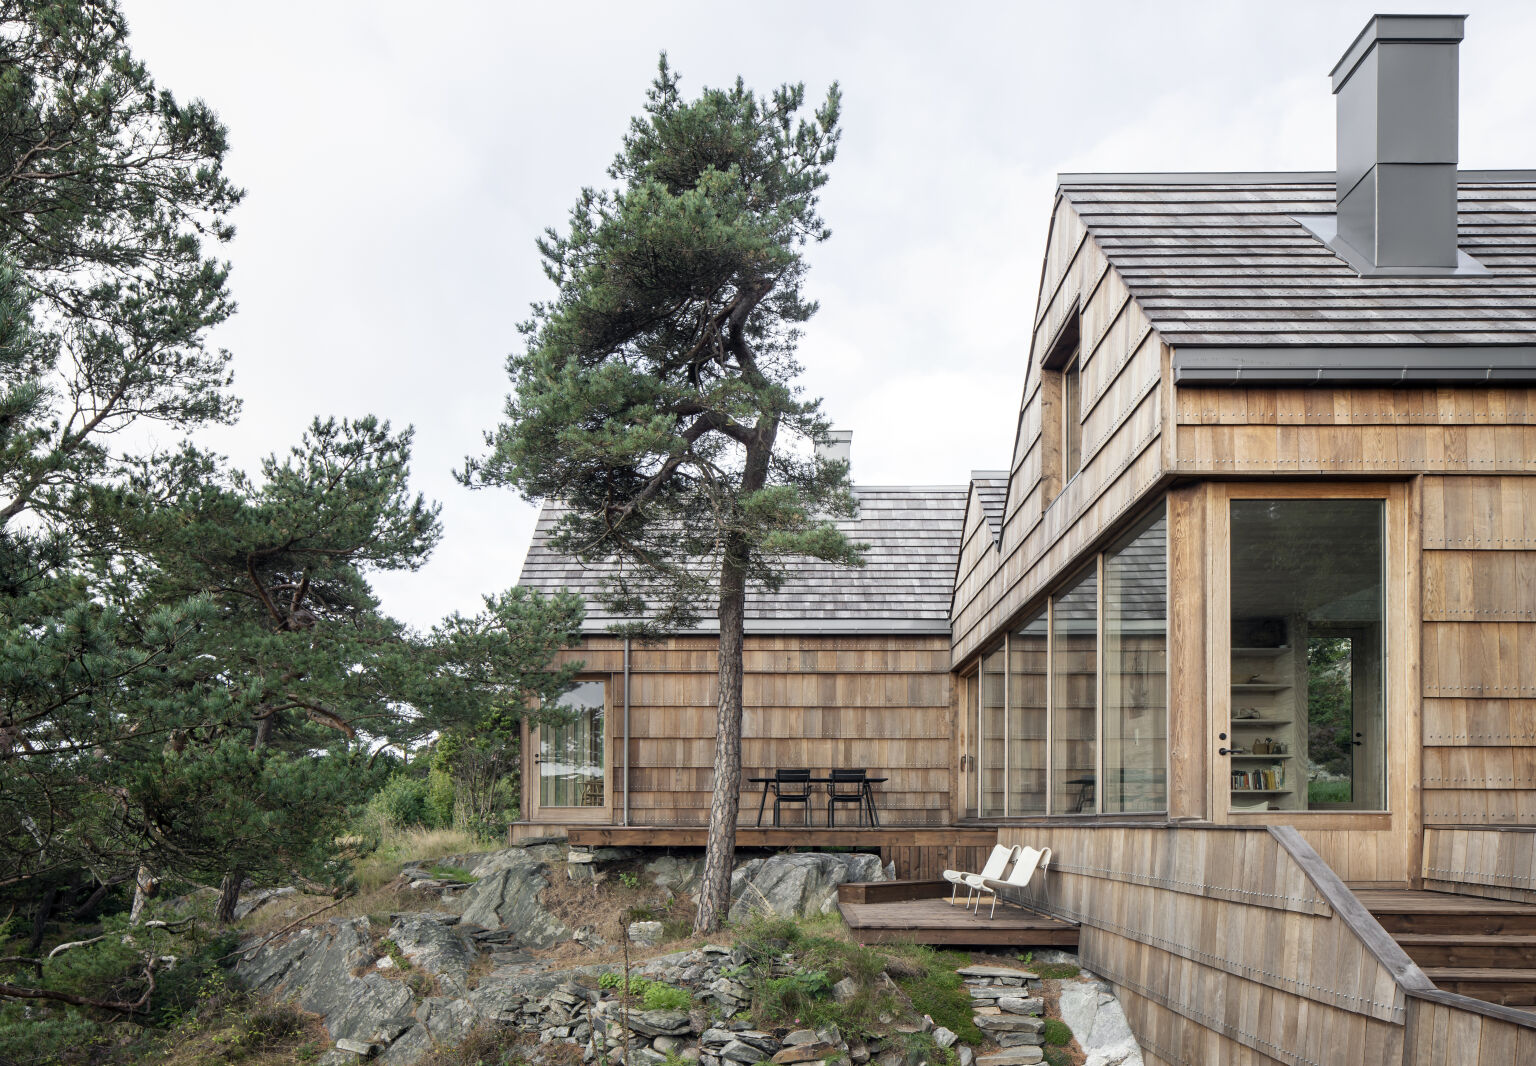 Saltviga House A Coastal Norway Home Built Almost Entirely With Dinesen Flooring Scraps portrait 3